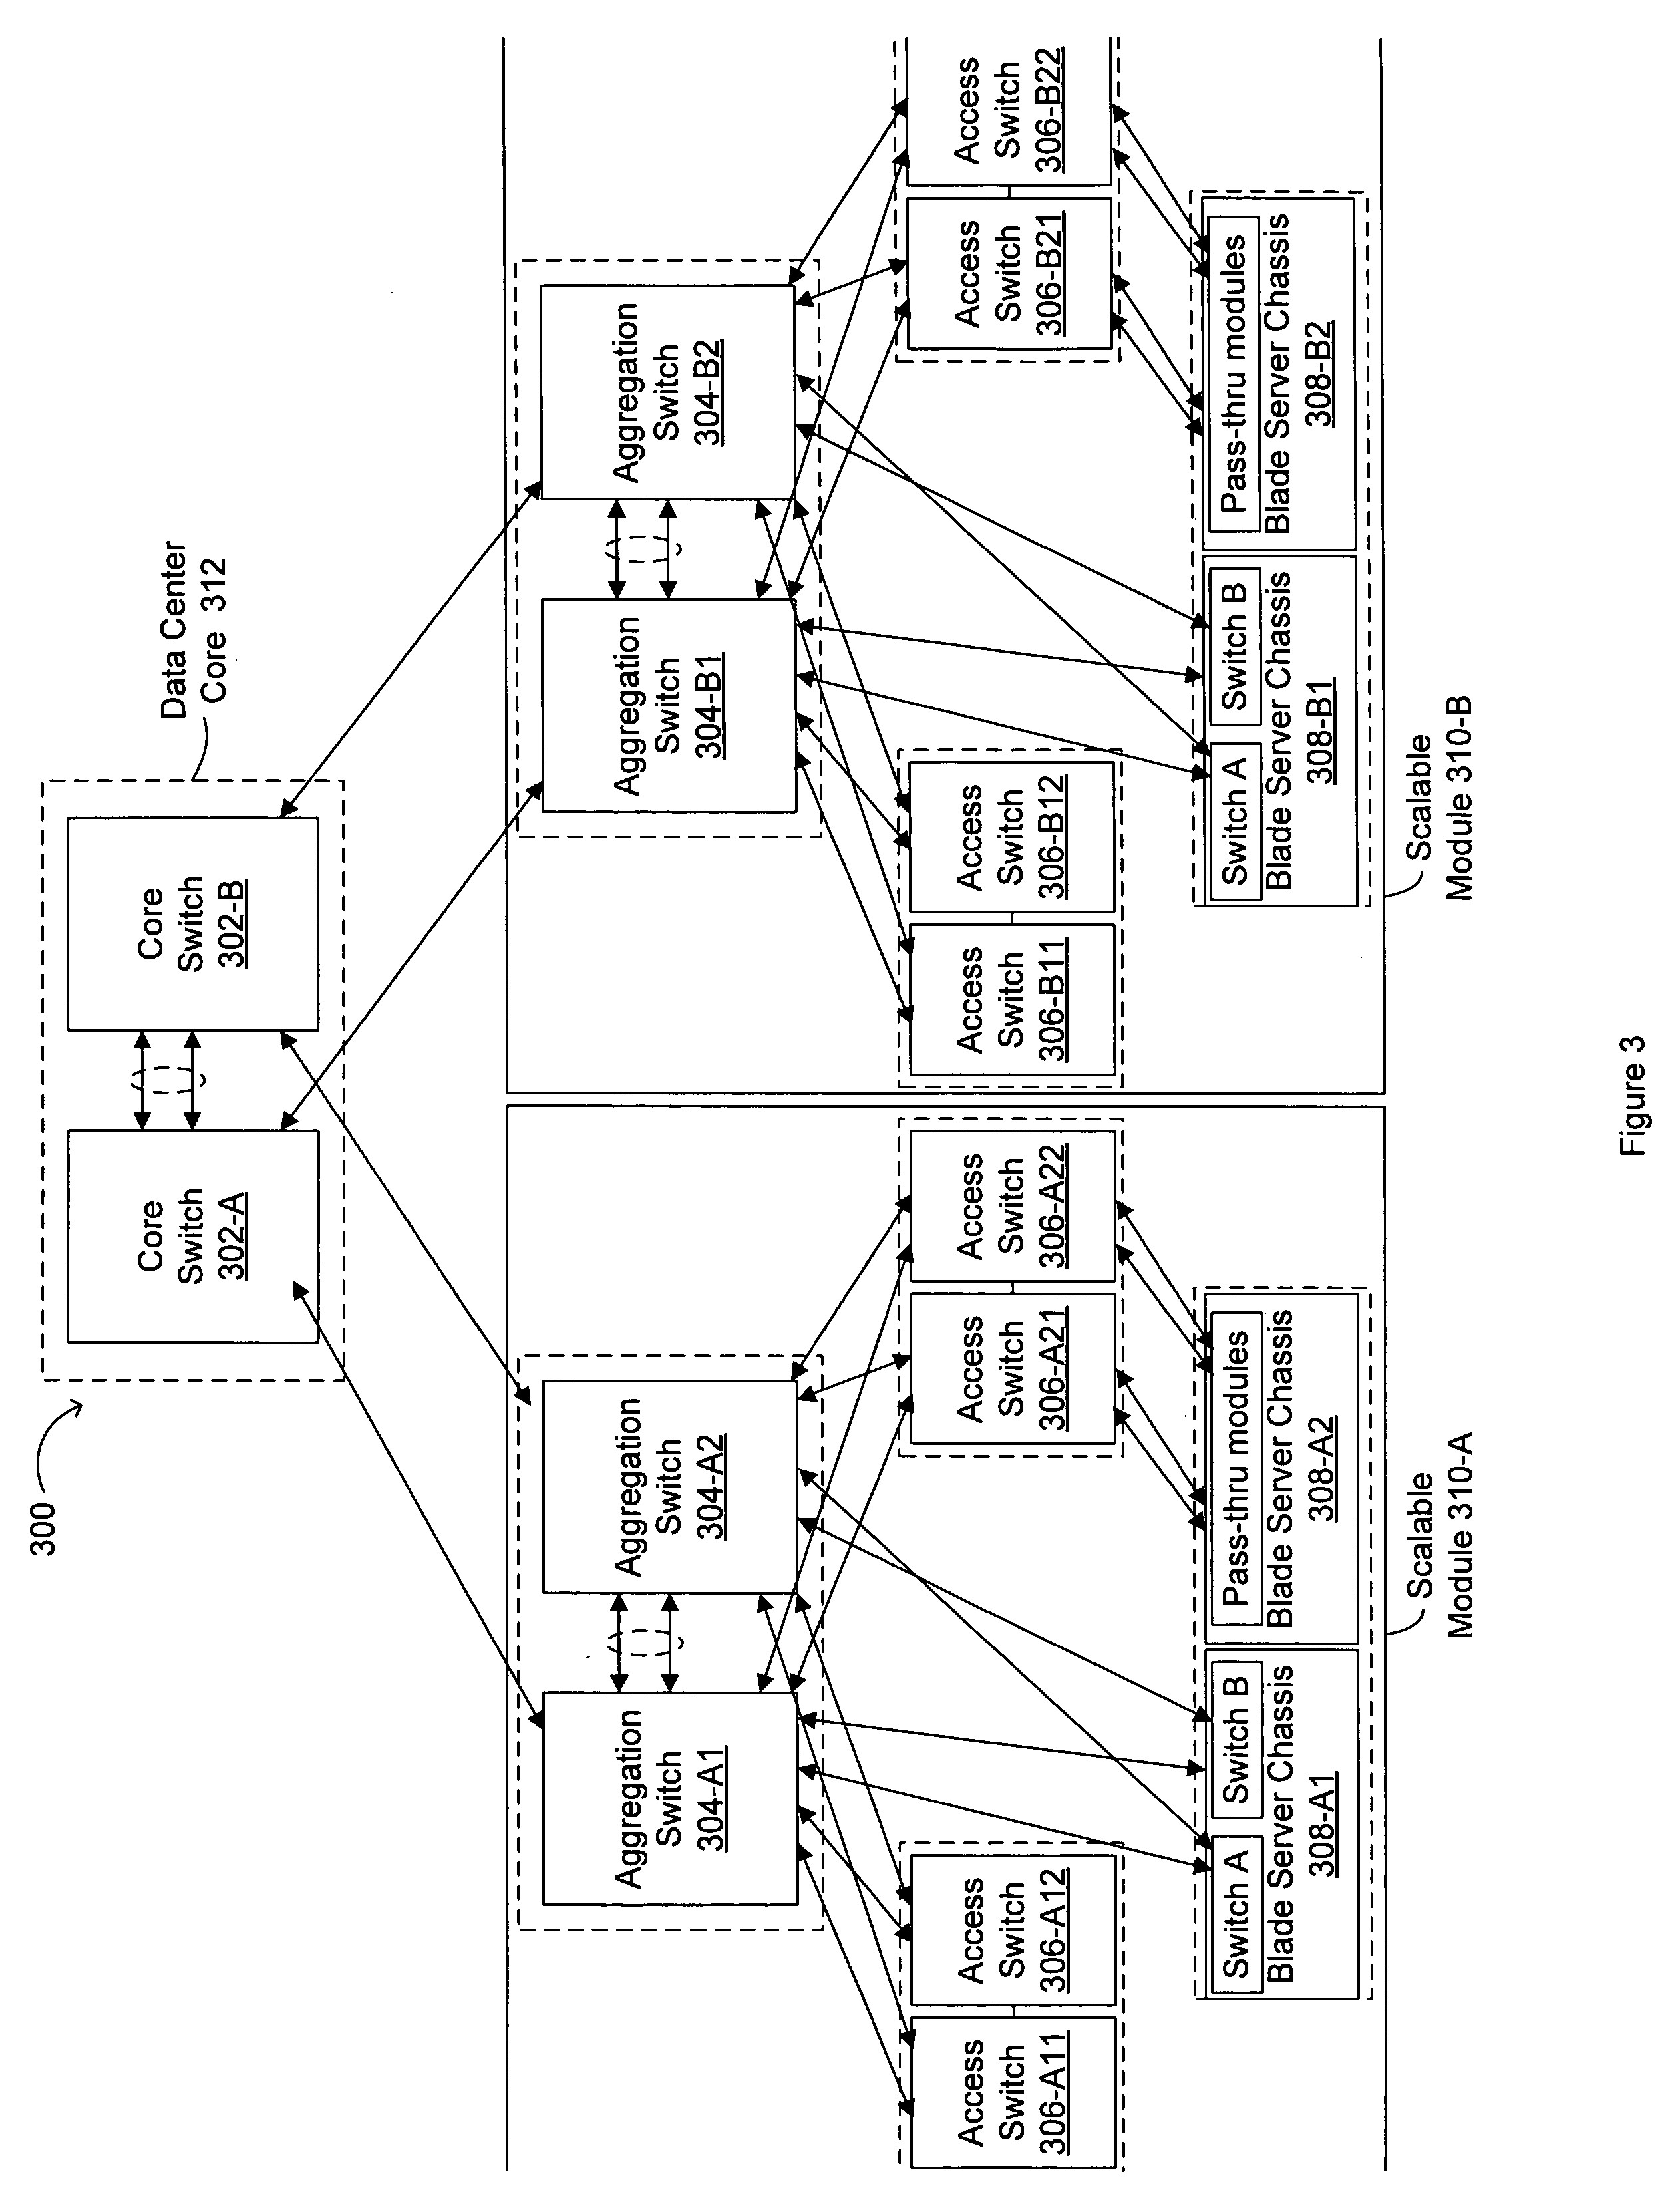 Architecture and method for accessing services in a data center